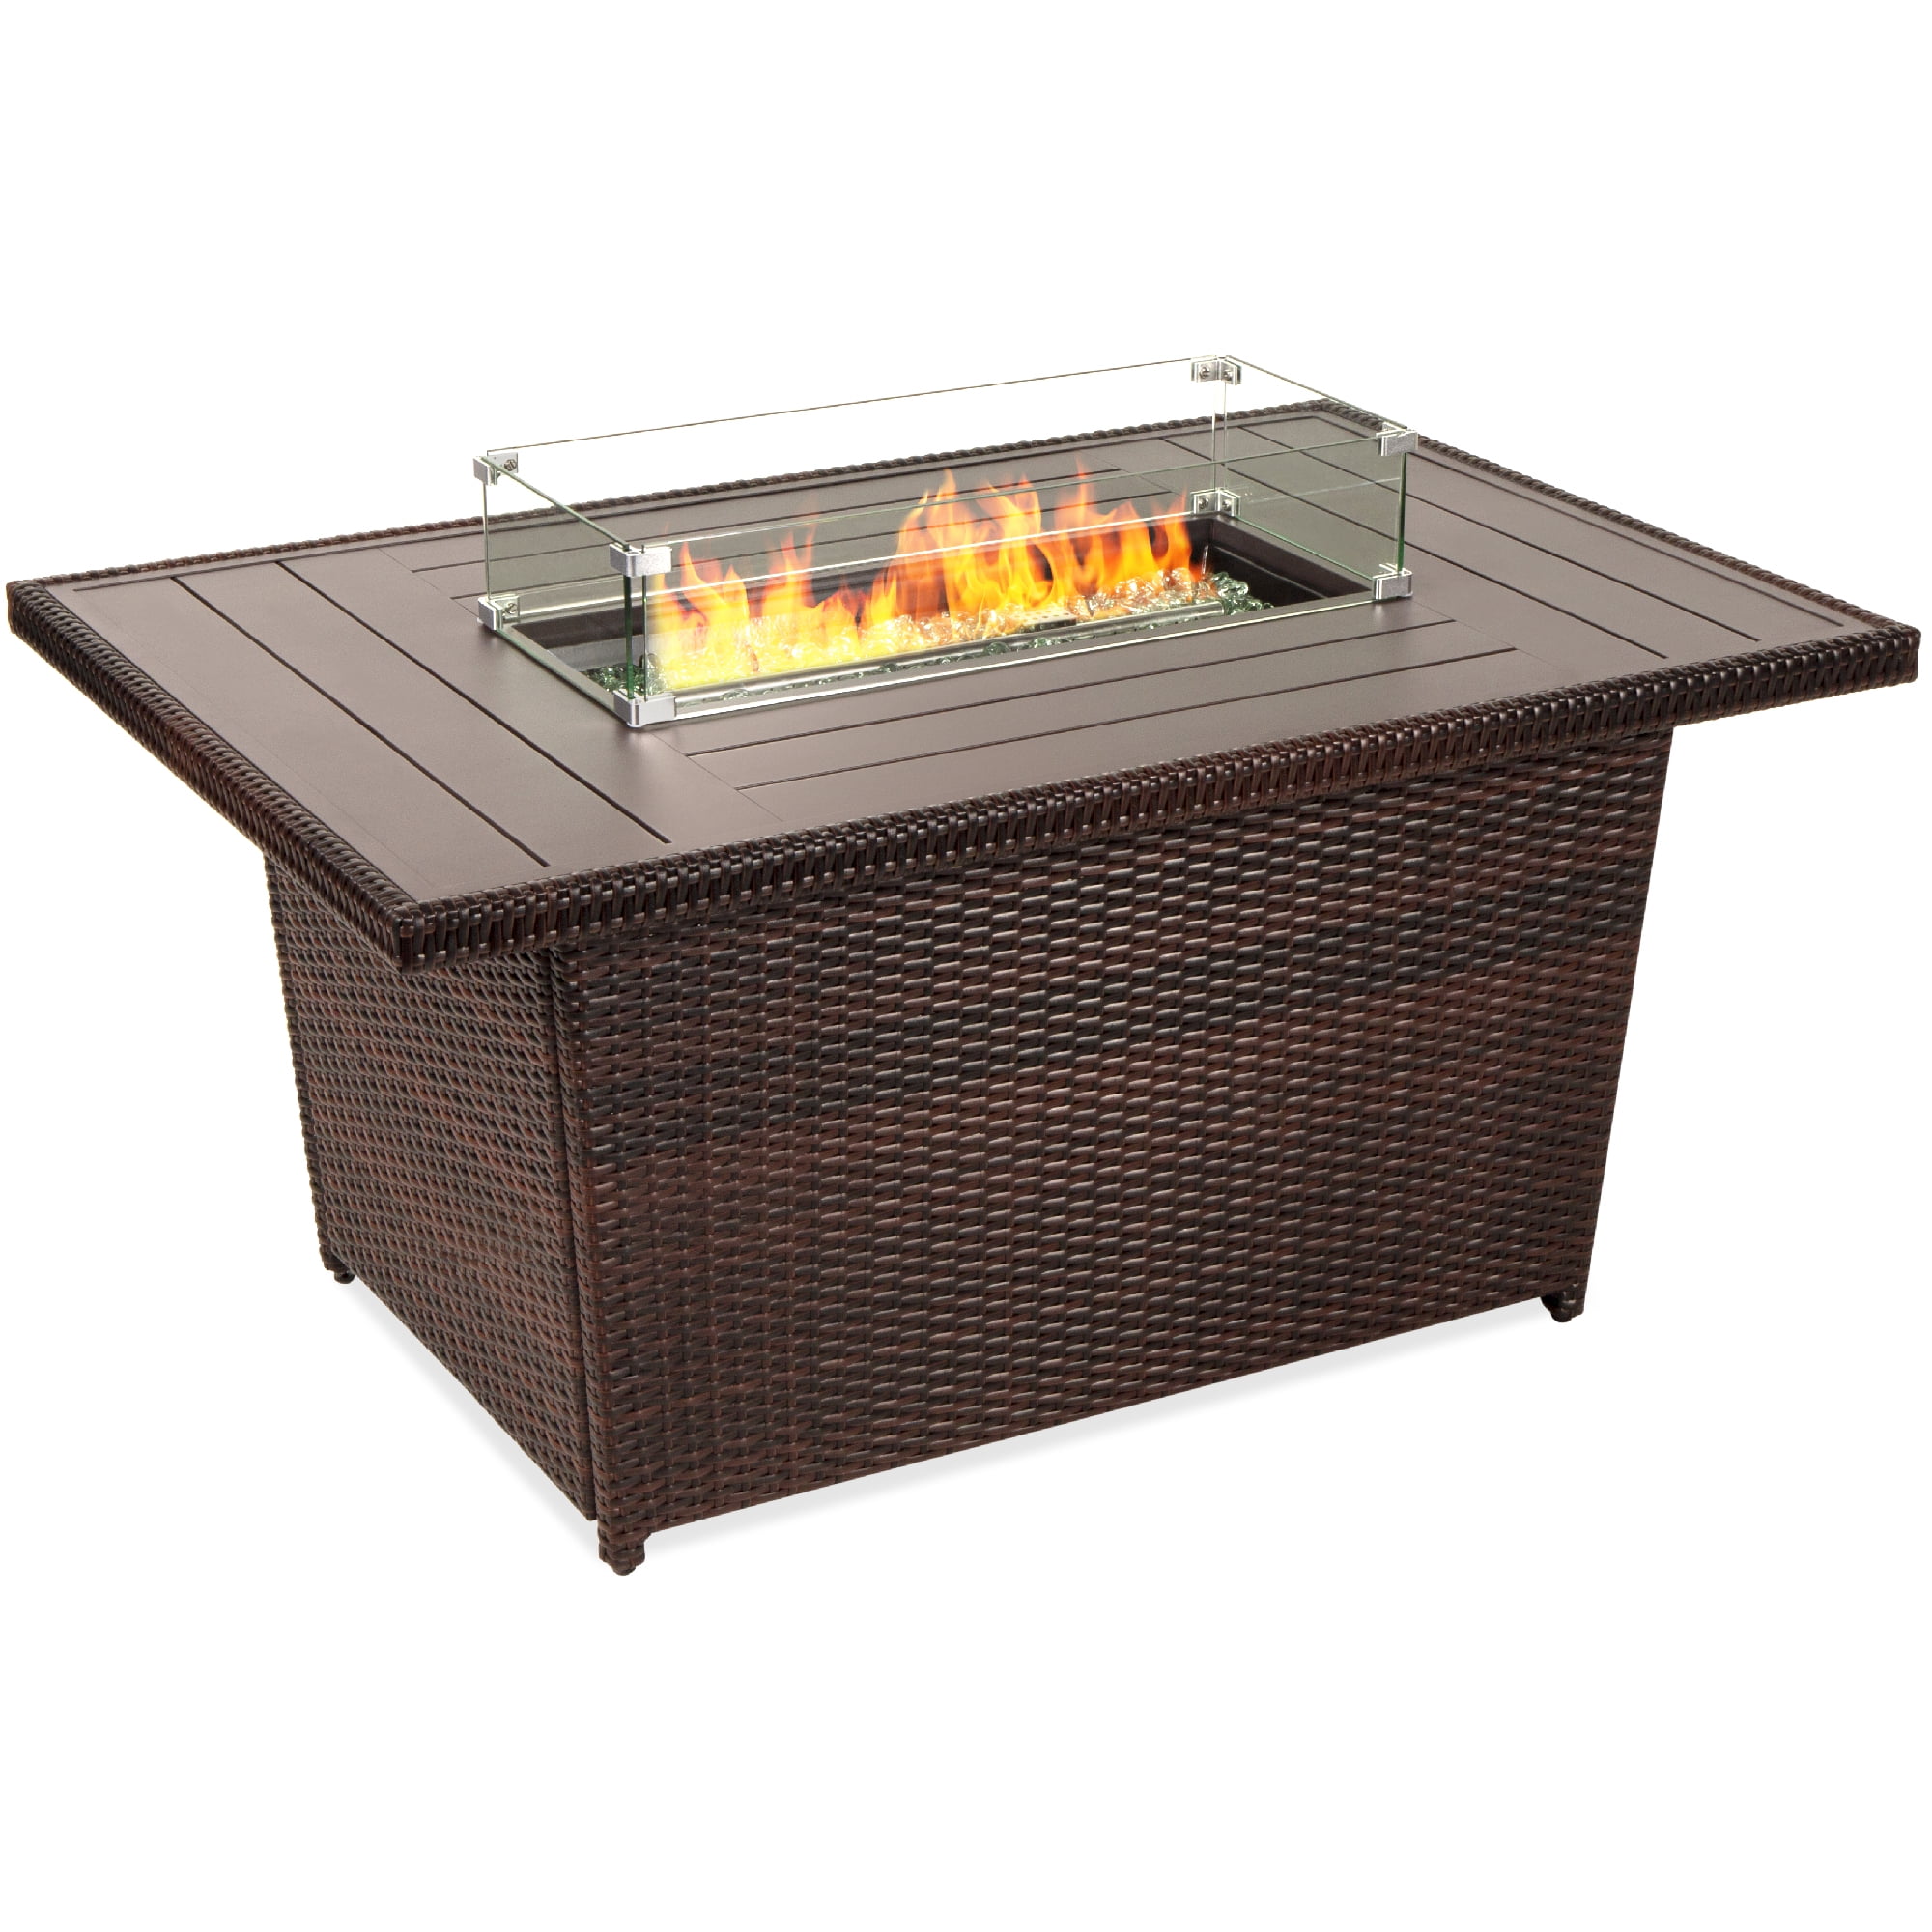 Best Choice Products 57in 50 000 Btu Rectangular Propane Aluminum Gas Fire Pit Table W Cover Glass Beads Dark Brown Walmart Com